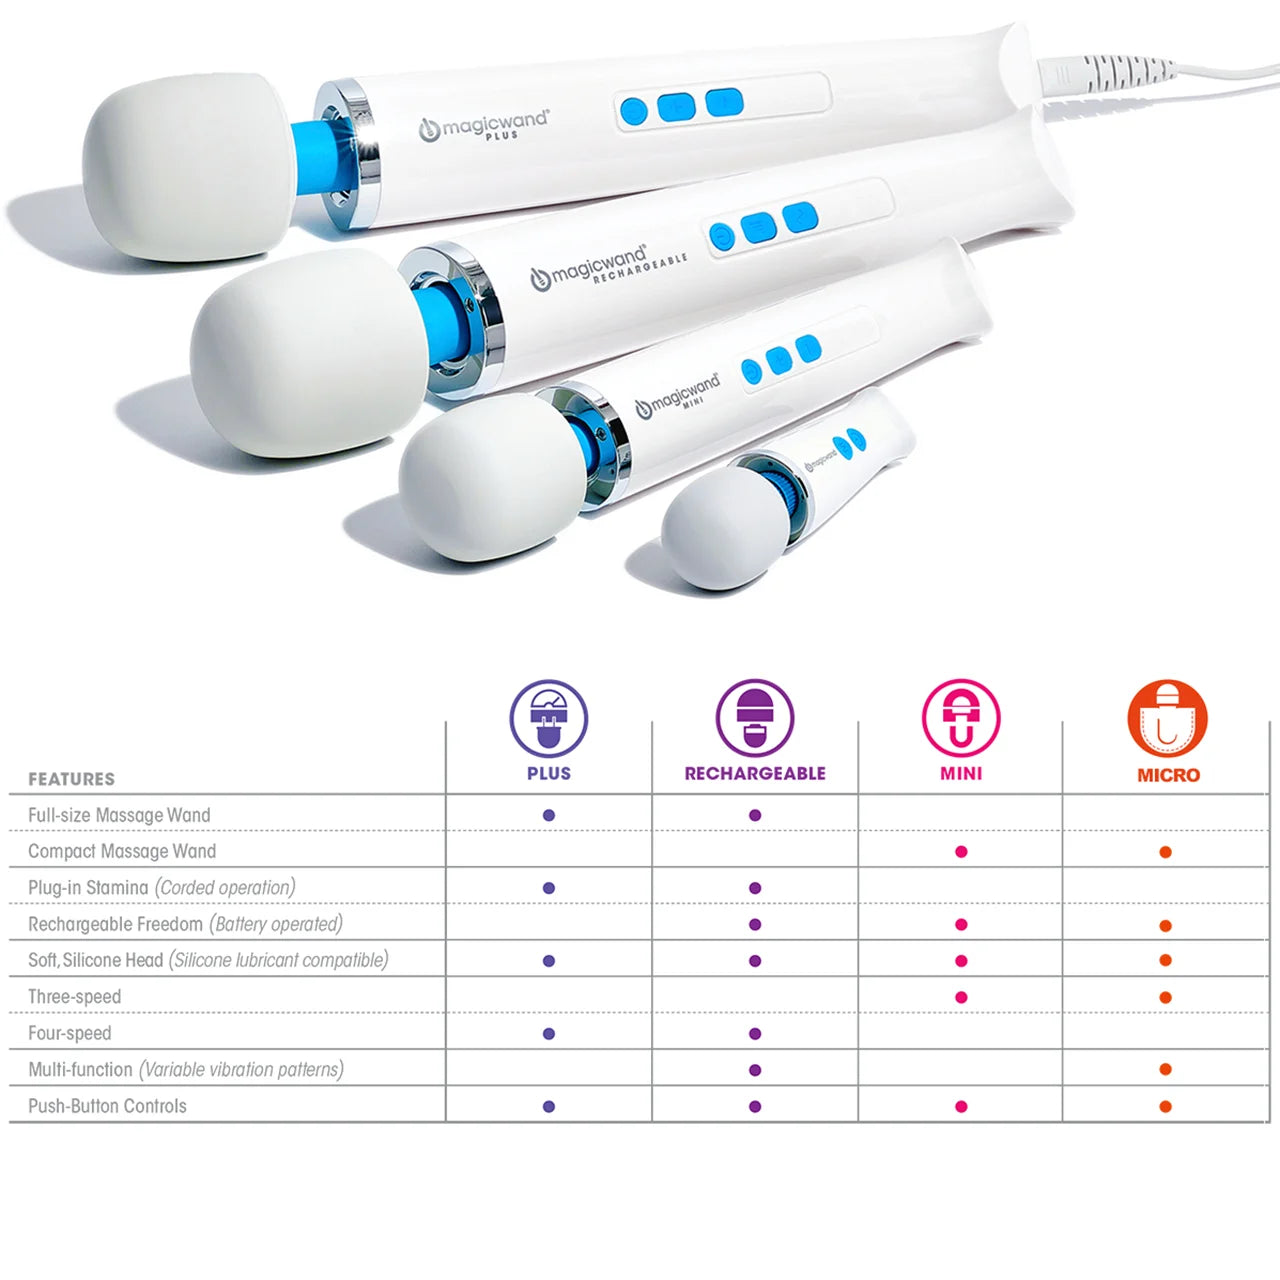 Product shot on a white background from L-R is the Magic Wand Plus, Magic Wand Rechargeable, Magic Wand Mini, and Magic Wand Micro. A comparison table of all four massagers showing their features is also present in the image.